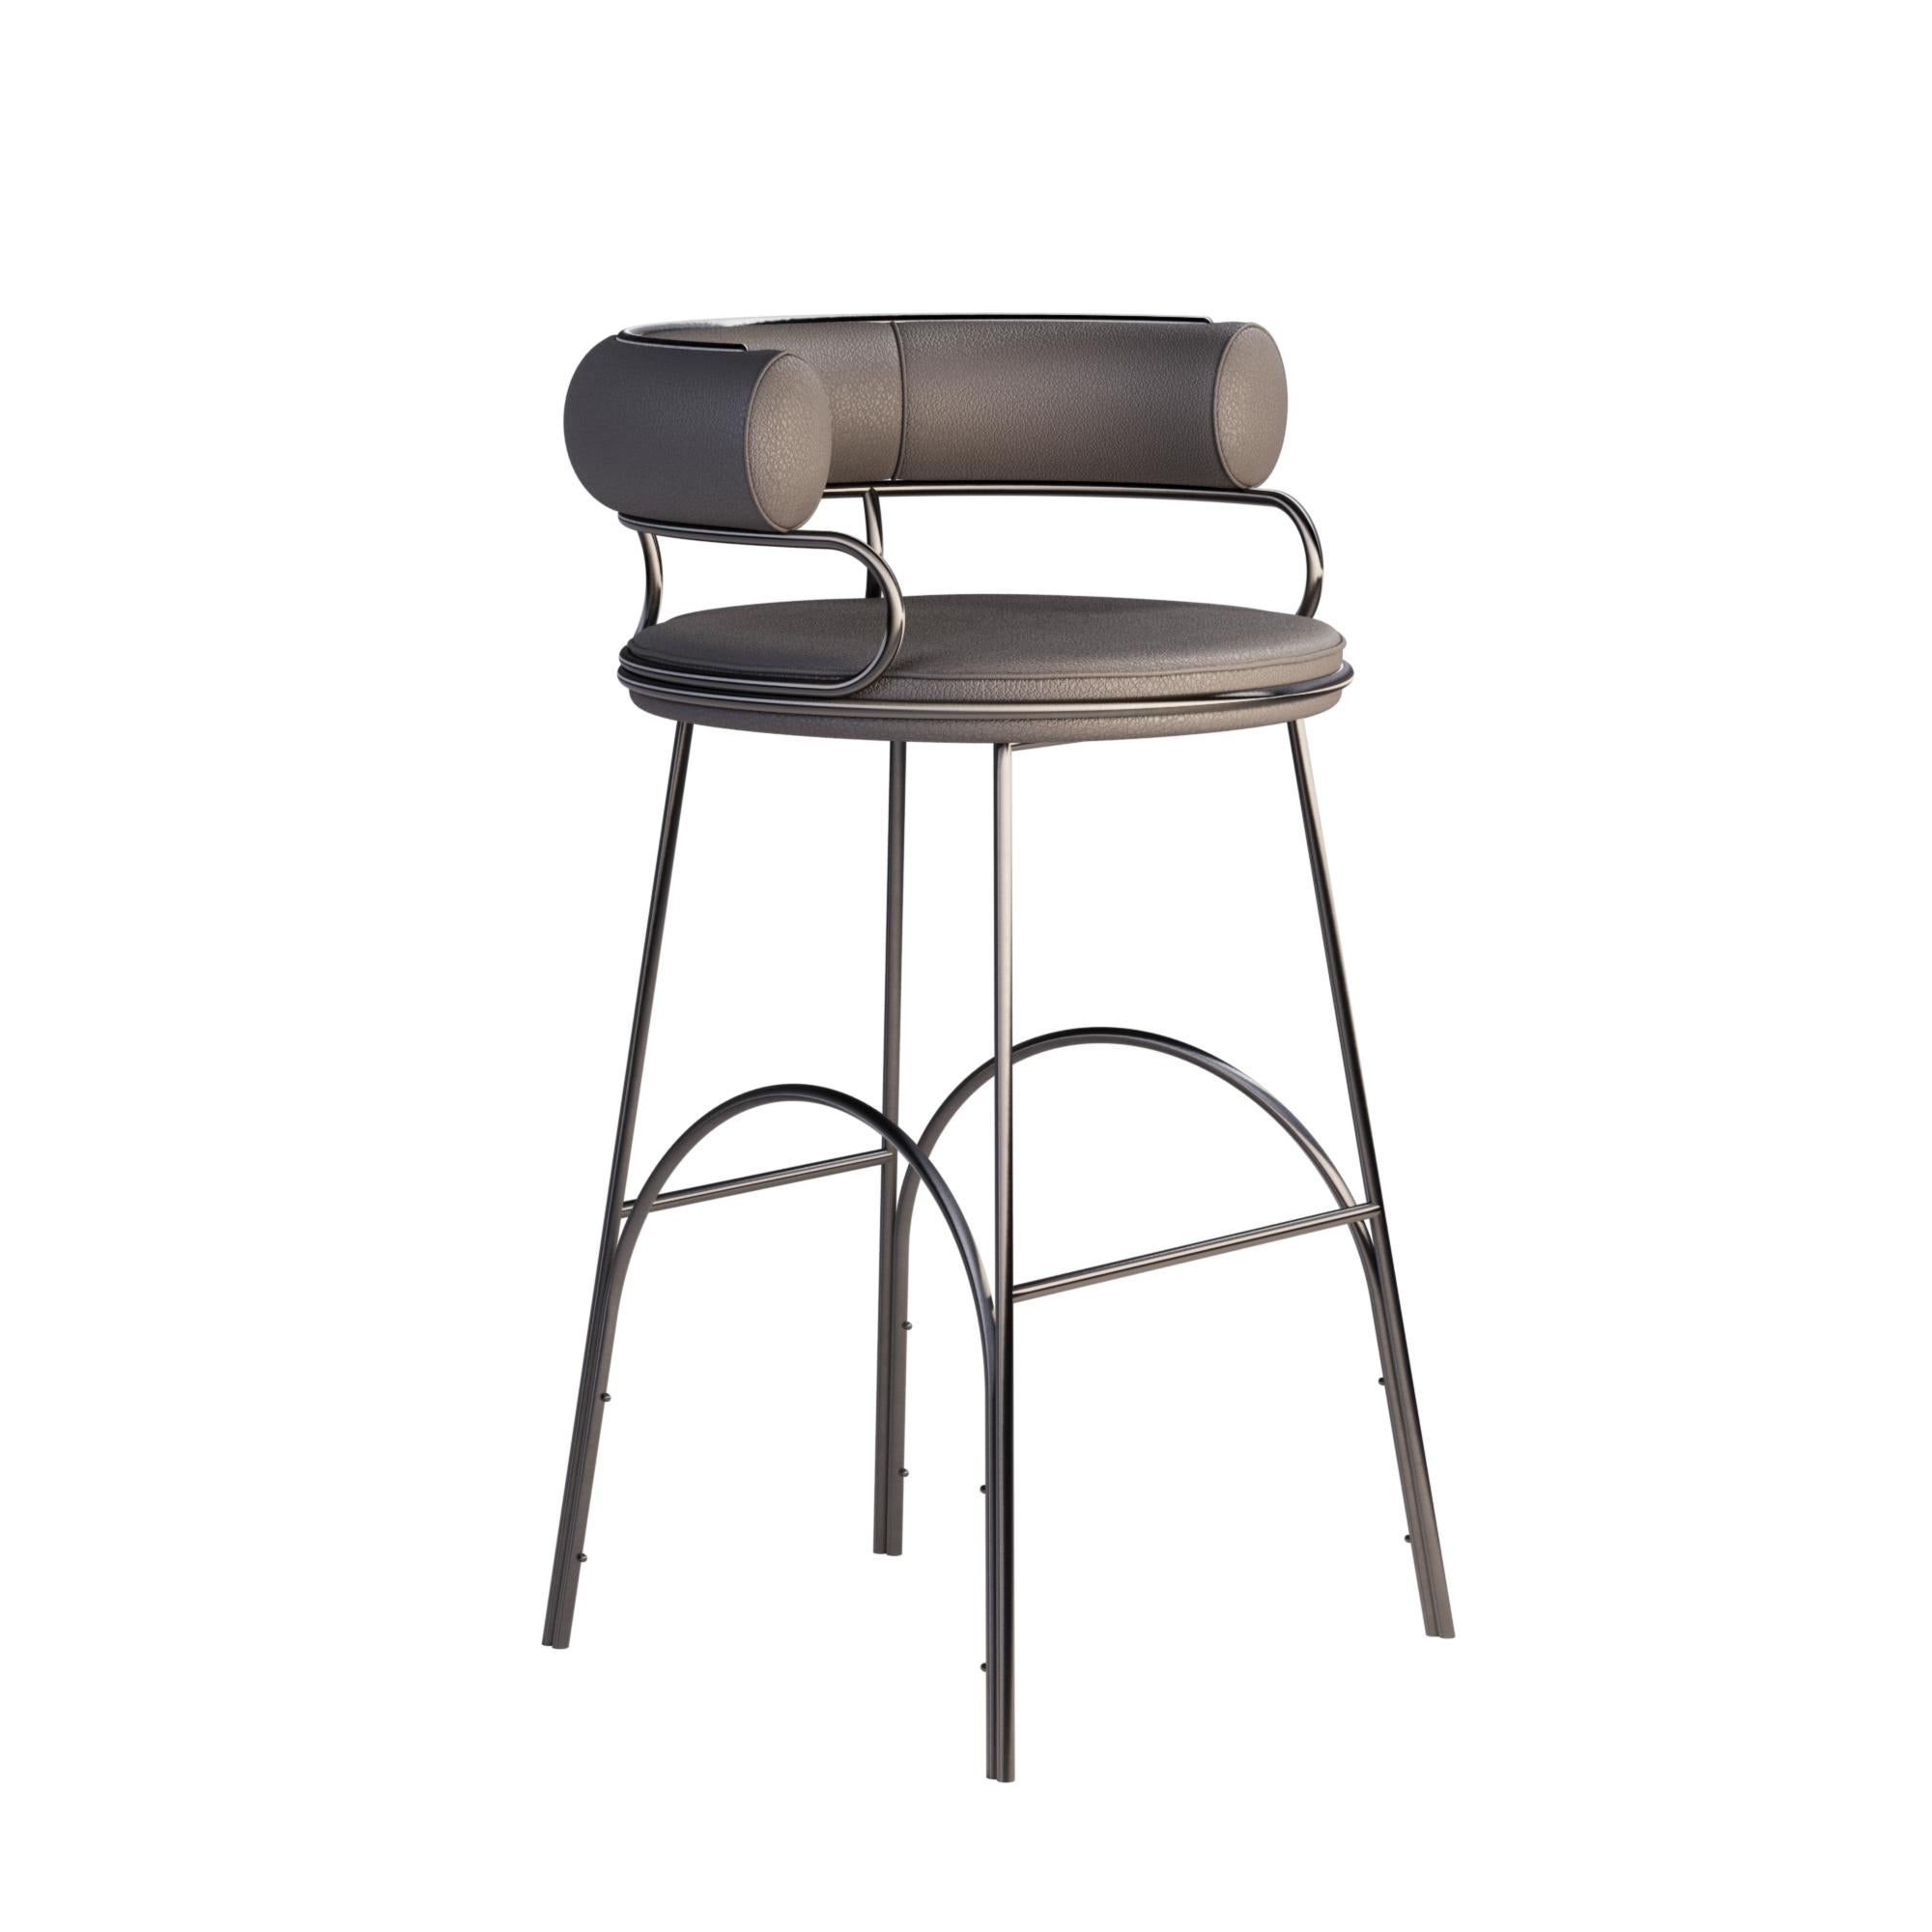 Contemporary 21st Century Metallic Austin Bar Chair Polished Gun Metal Steel Leather For Sale